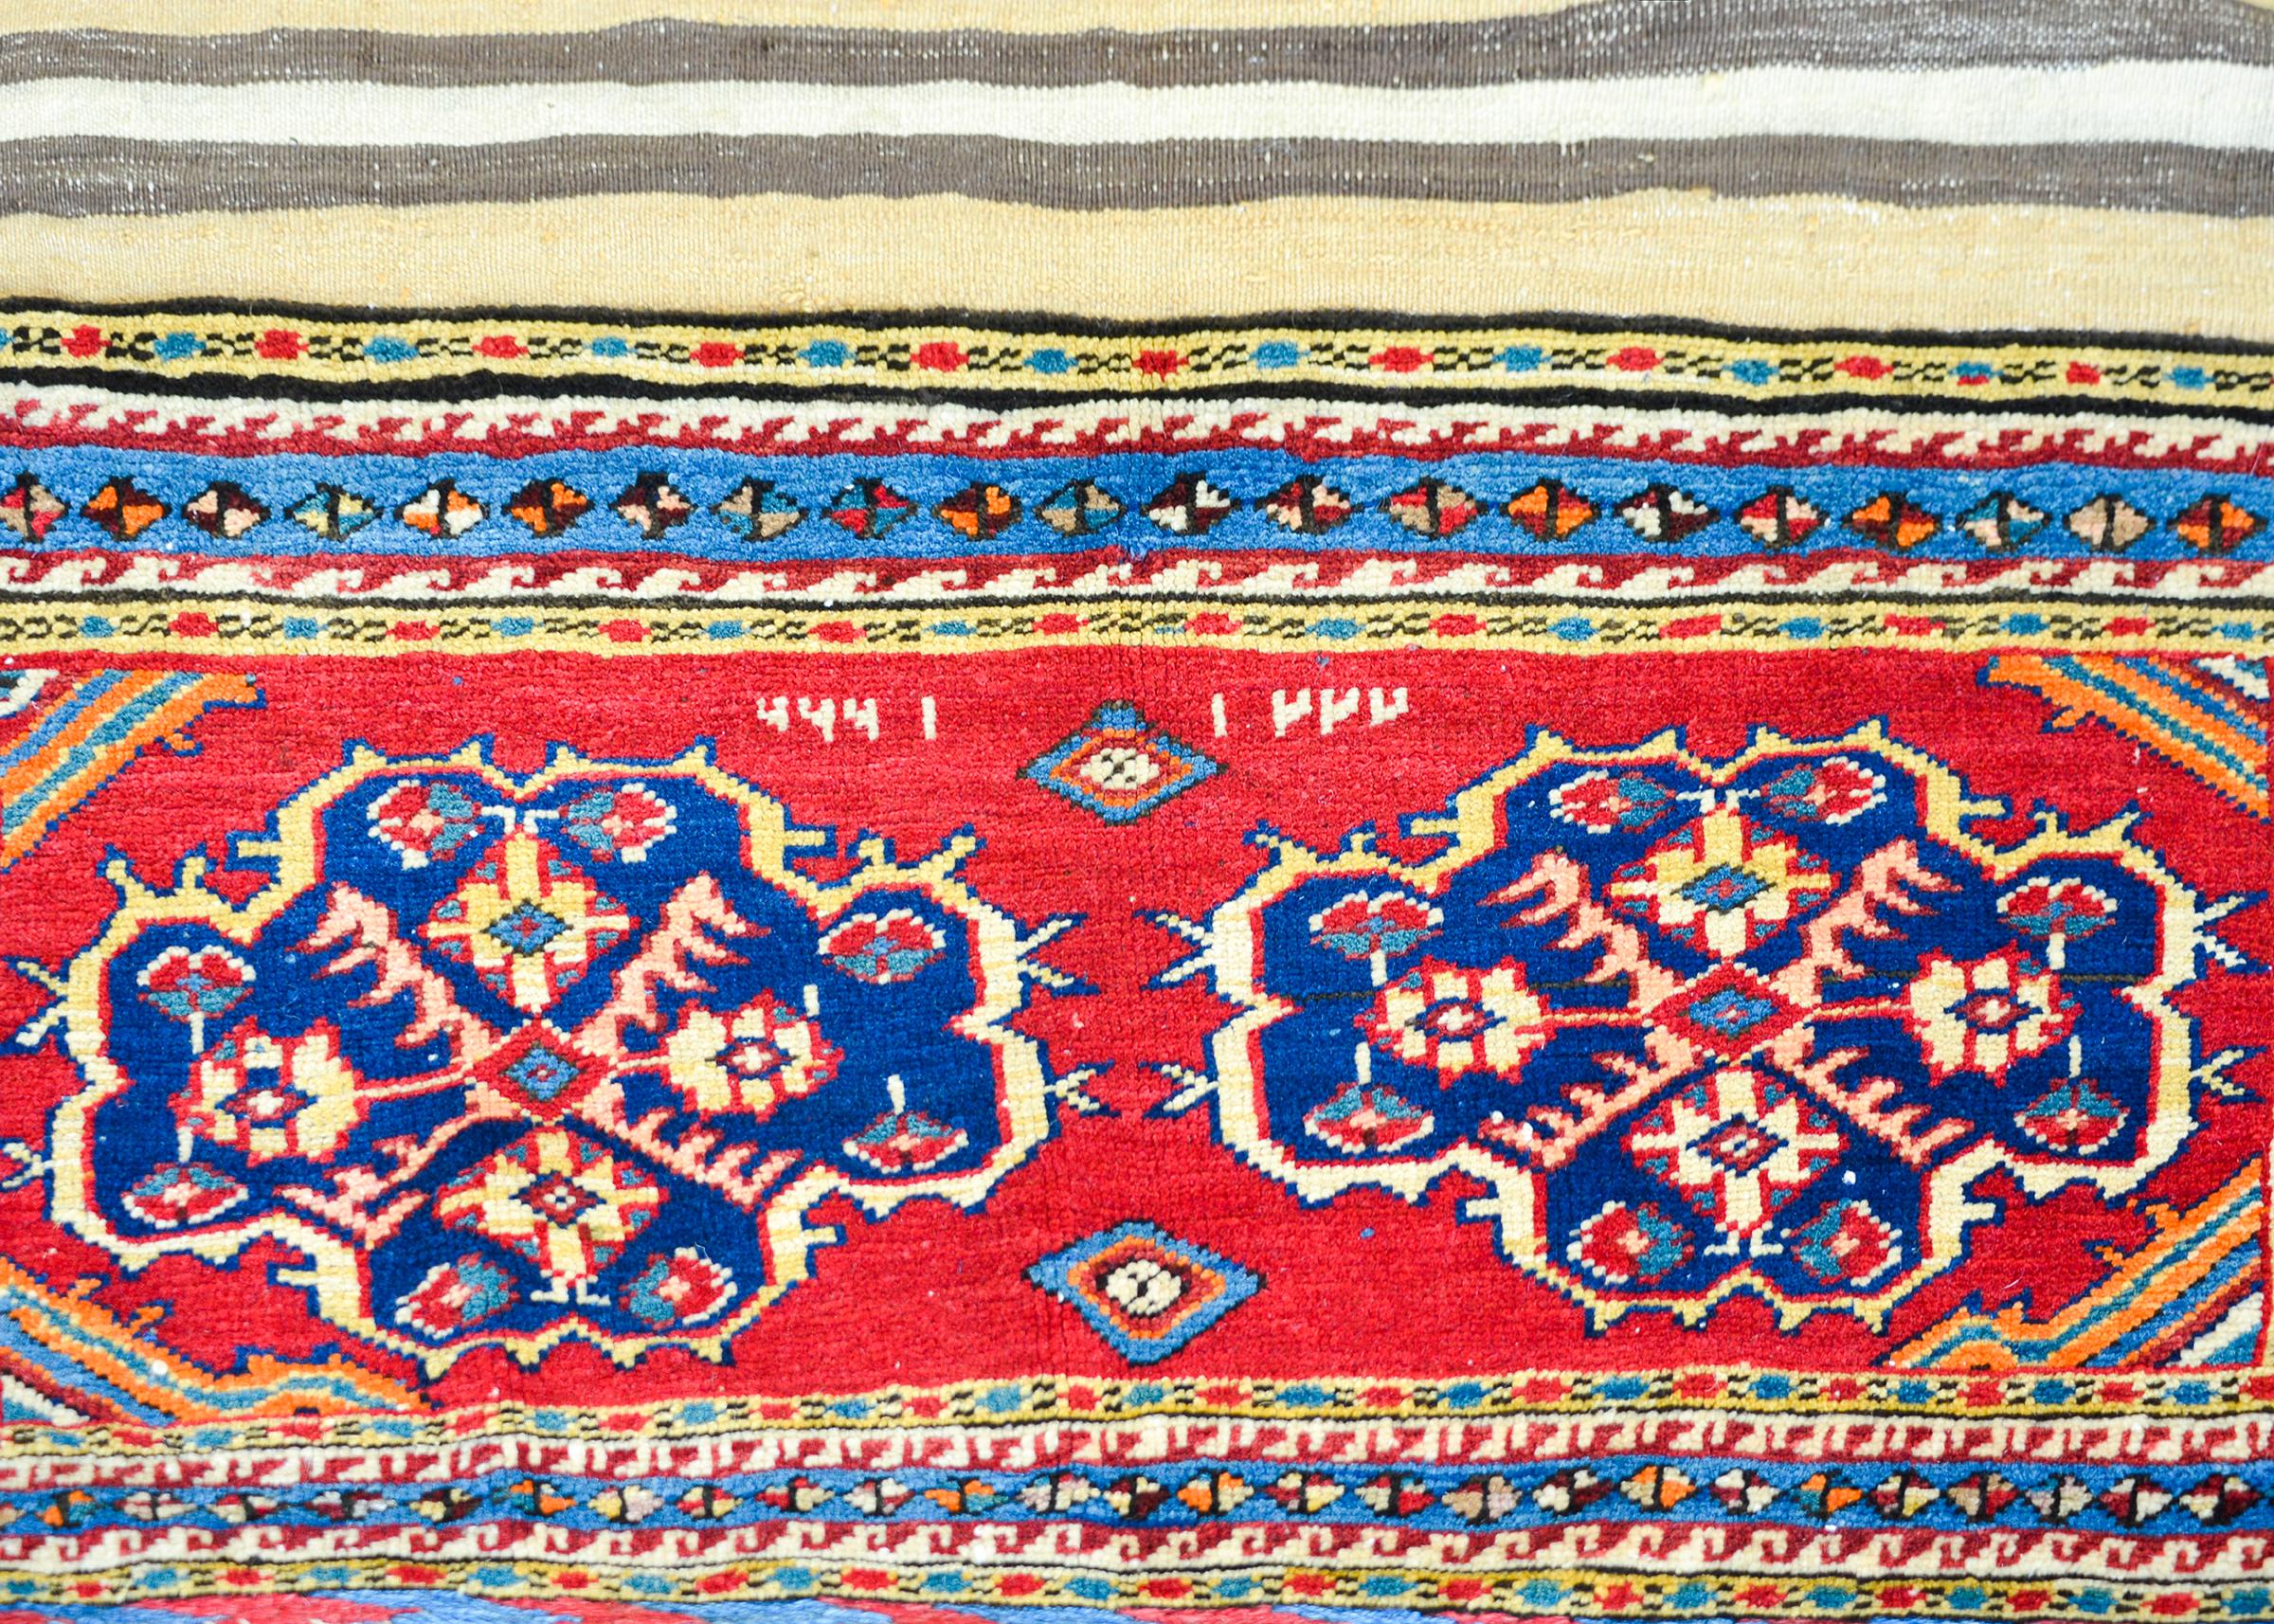 A stunning early 20th century Persian Lori horse blanket rug with ends woven with two floral medallions woven in indigo, crimson, and gold, and surrounded by petite geometric patterned strips, and connected with a simple striped flatweave backing.